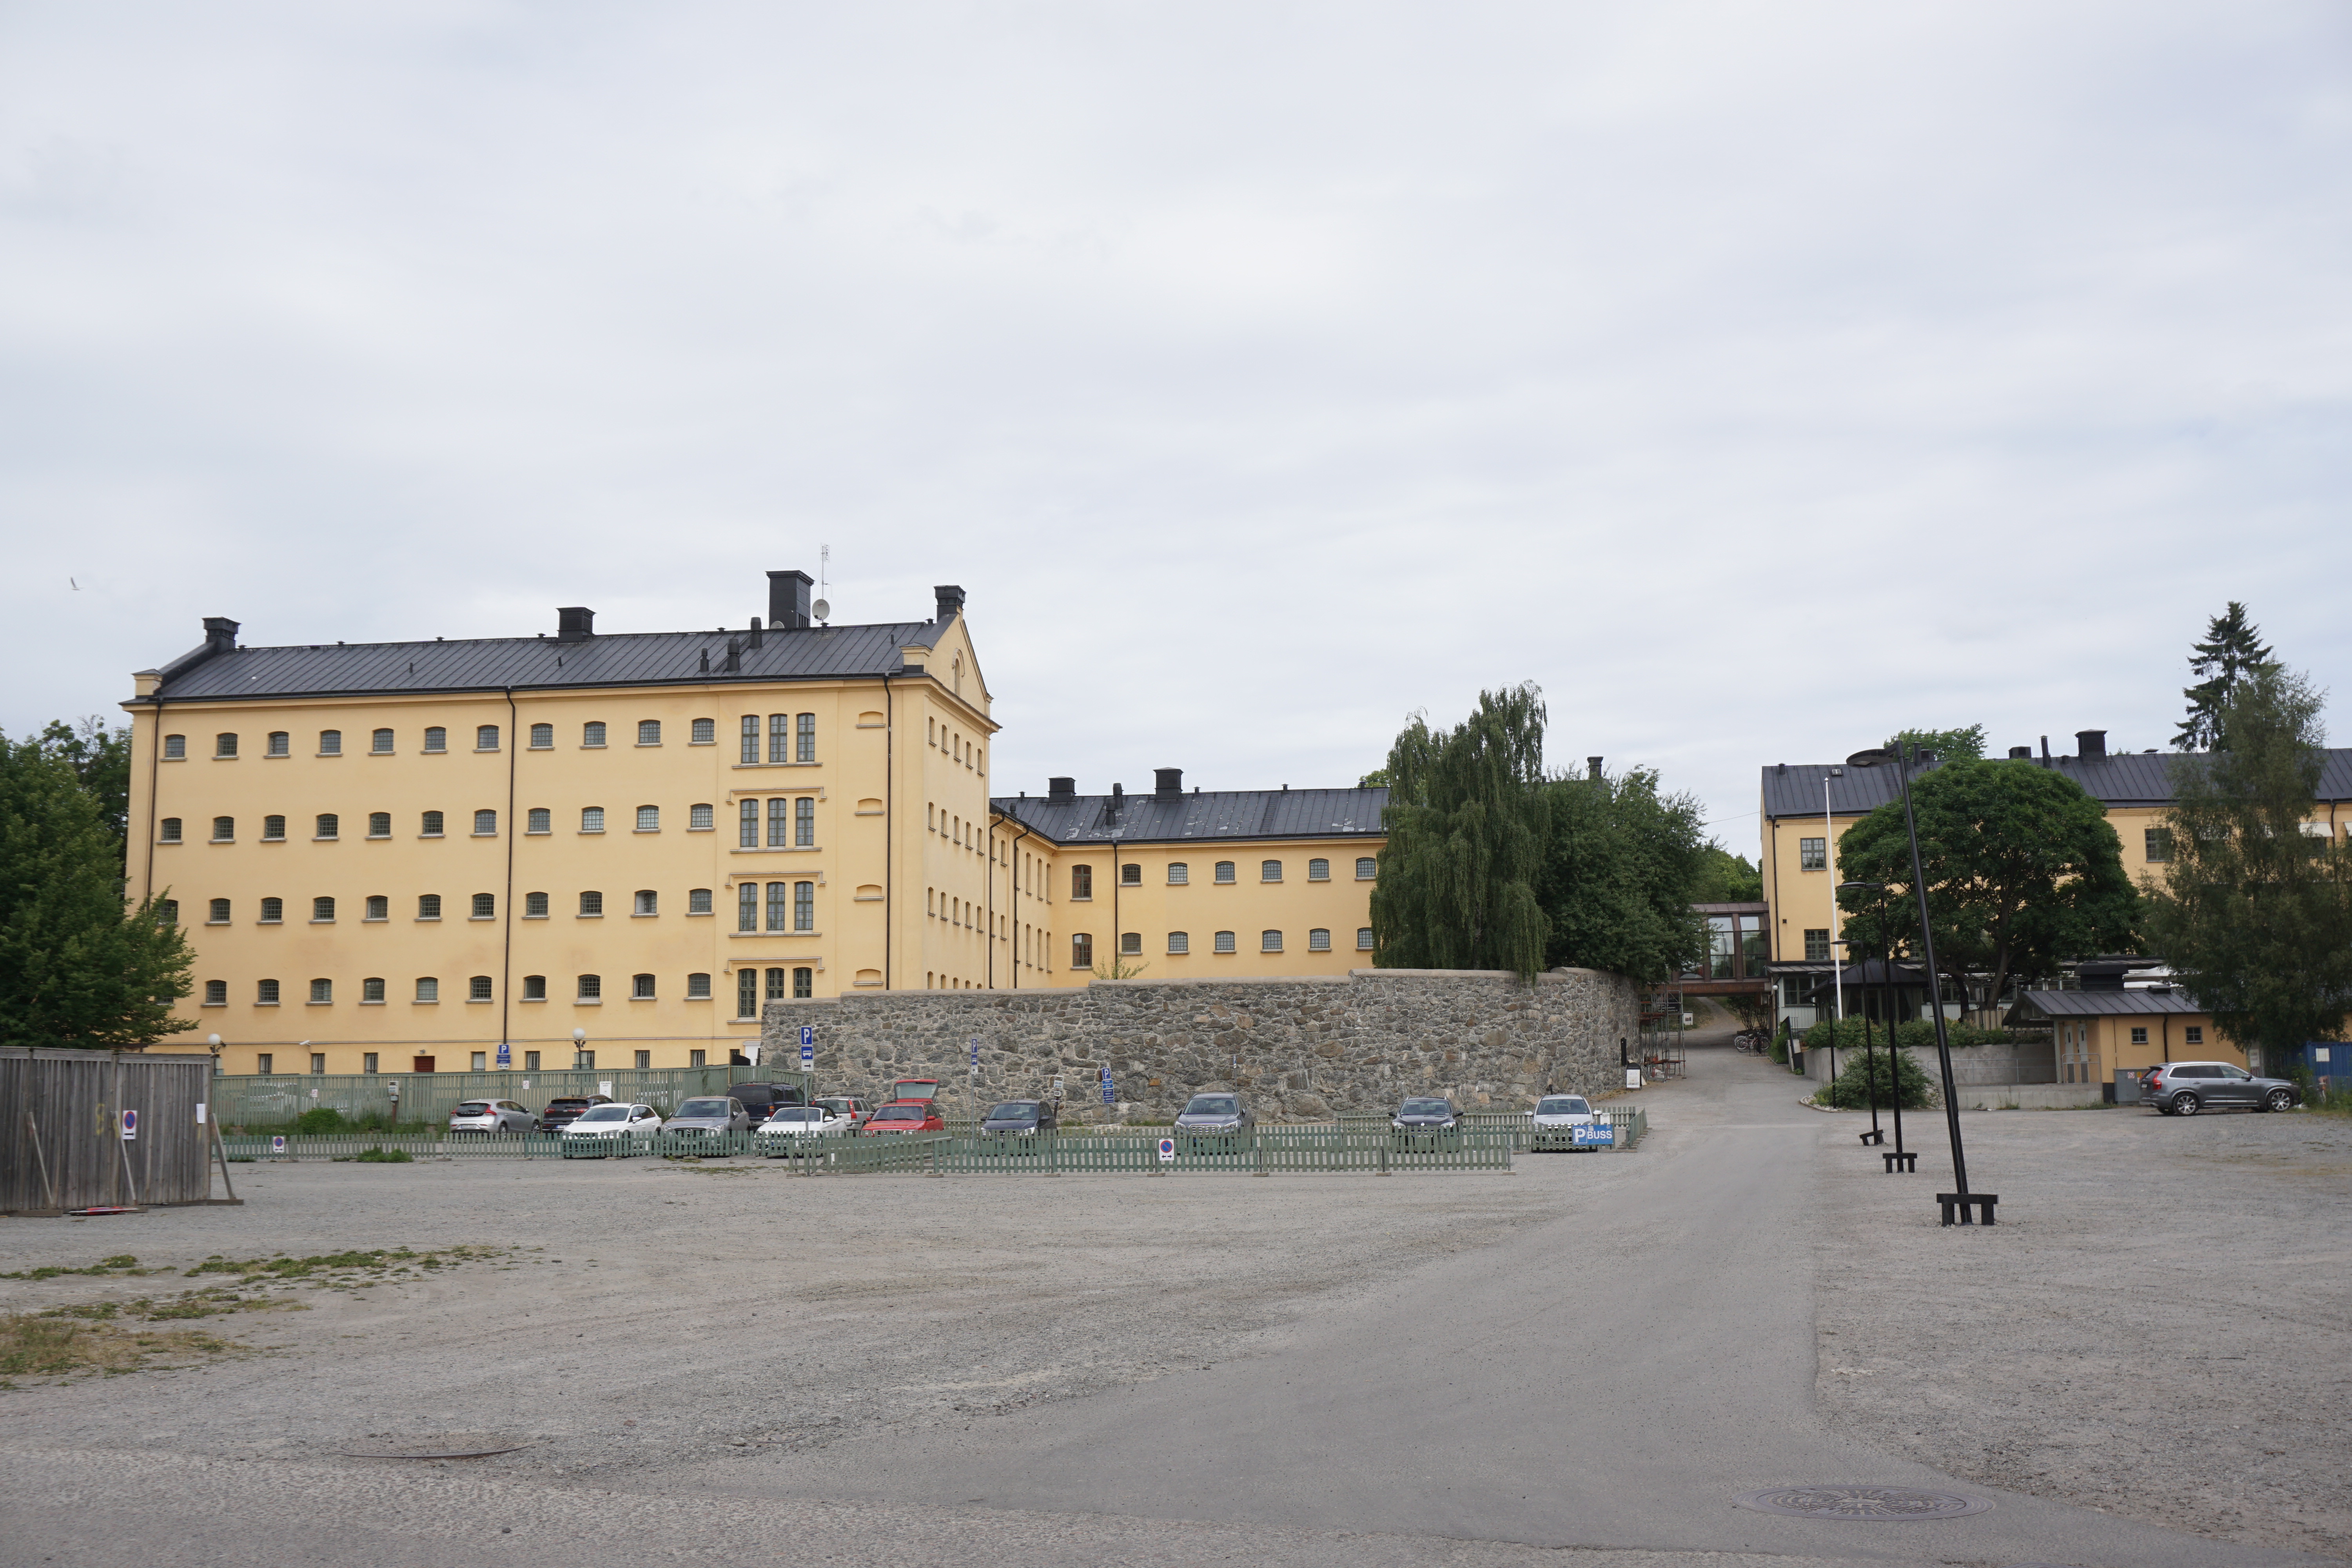 large parts of the former prison remains and have been turned into långholmen hotel and hostel